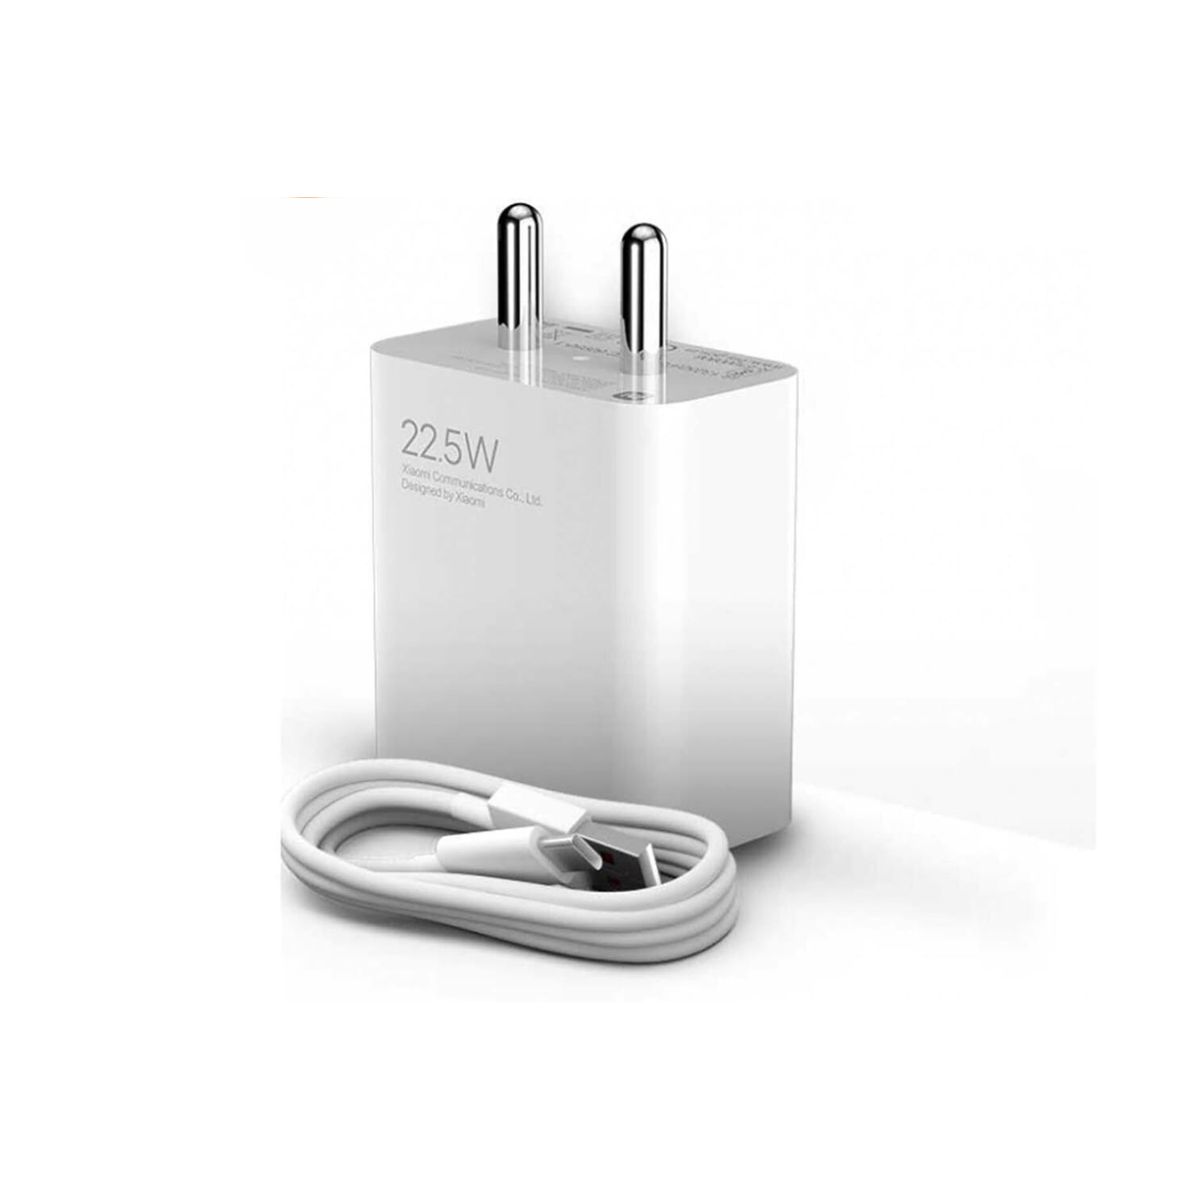 Mi Xiaomi 22.5W Fast USB Type C Charger Combo - White